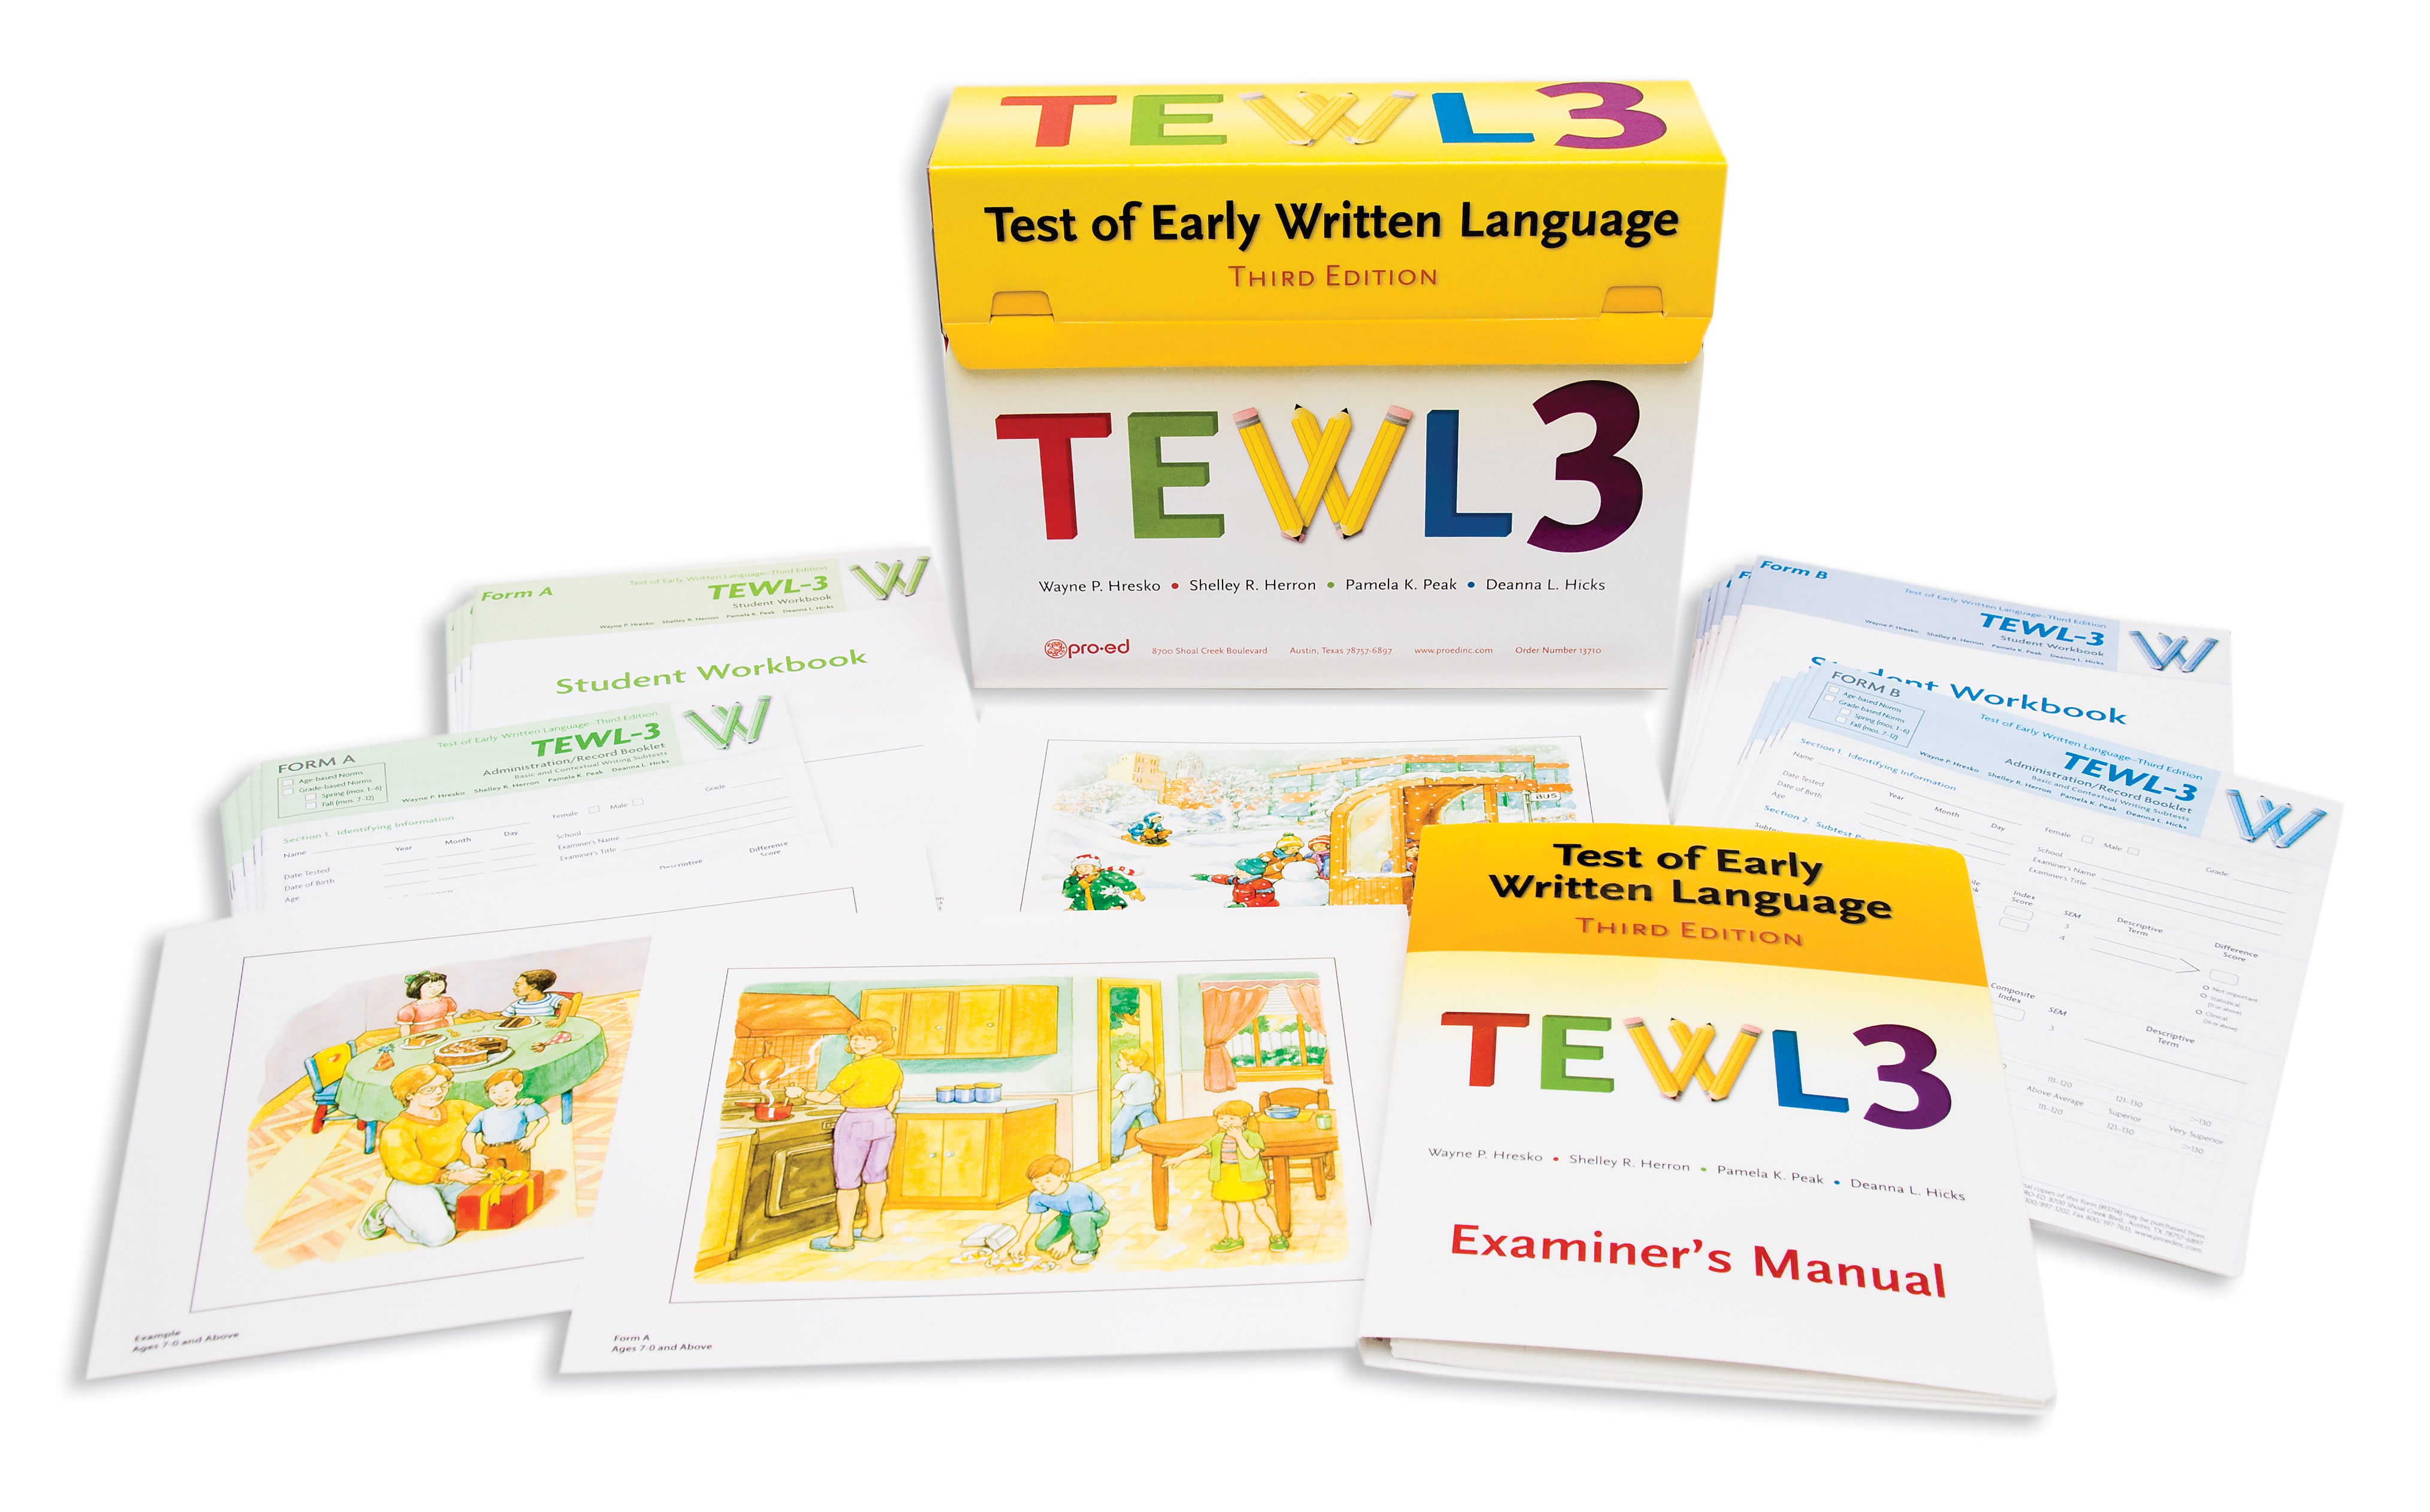 Test of Early Written Language - Third Edition (TEWL-3)